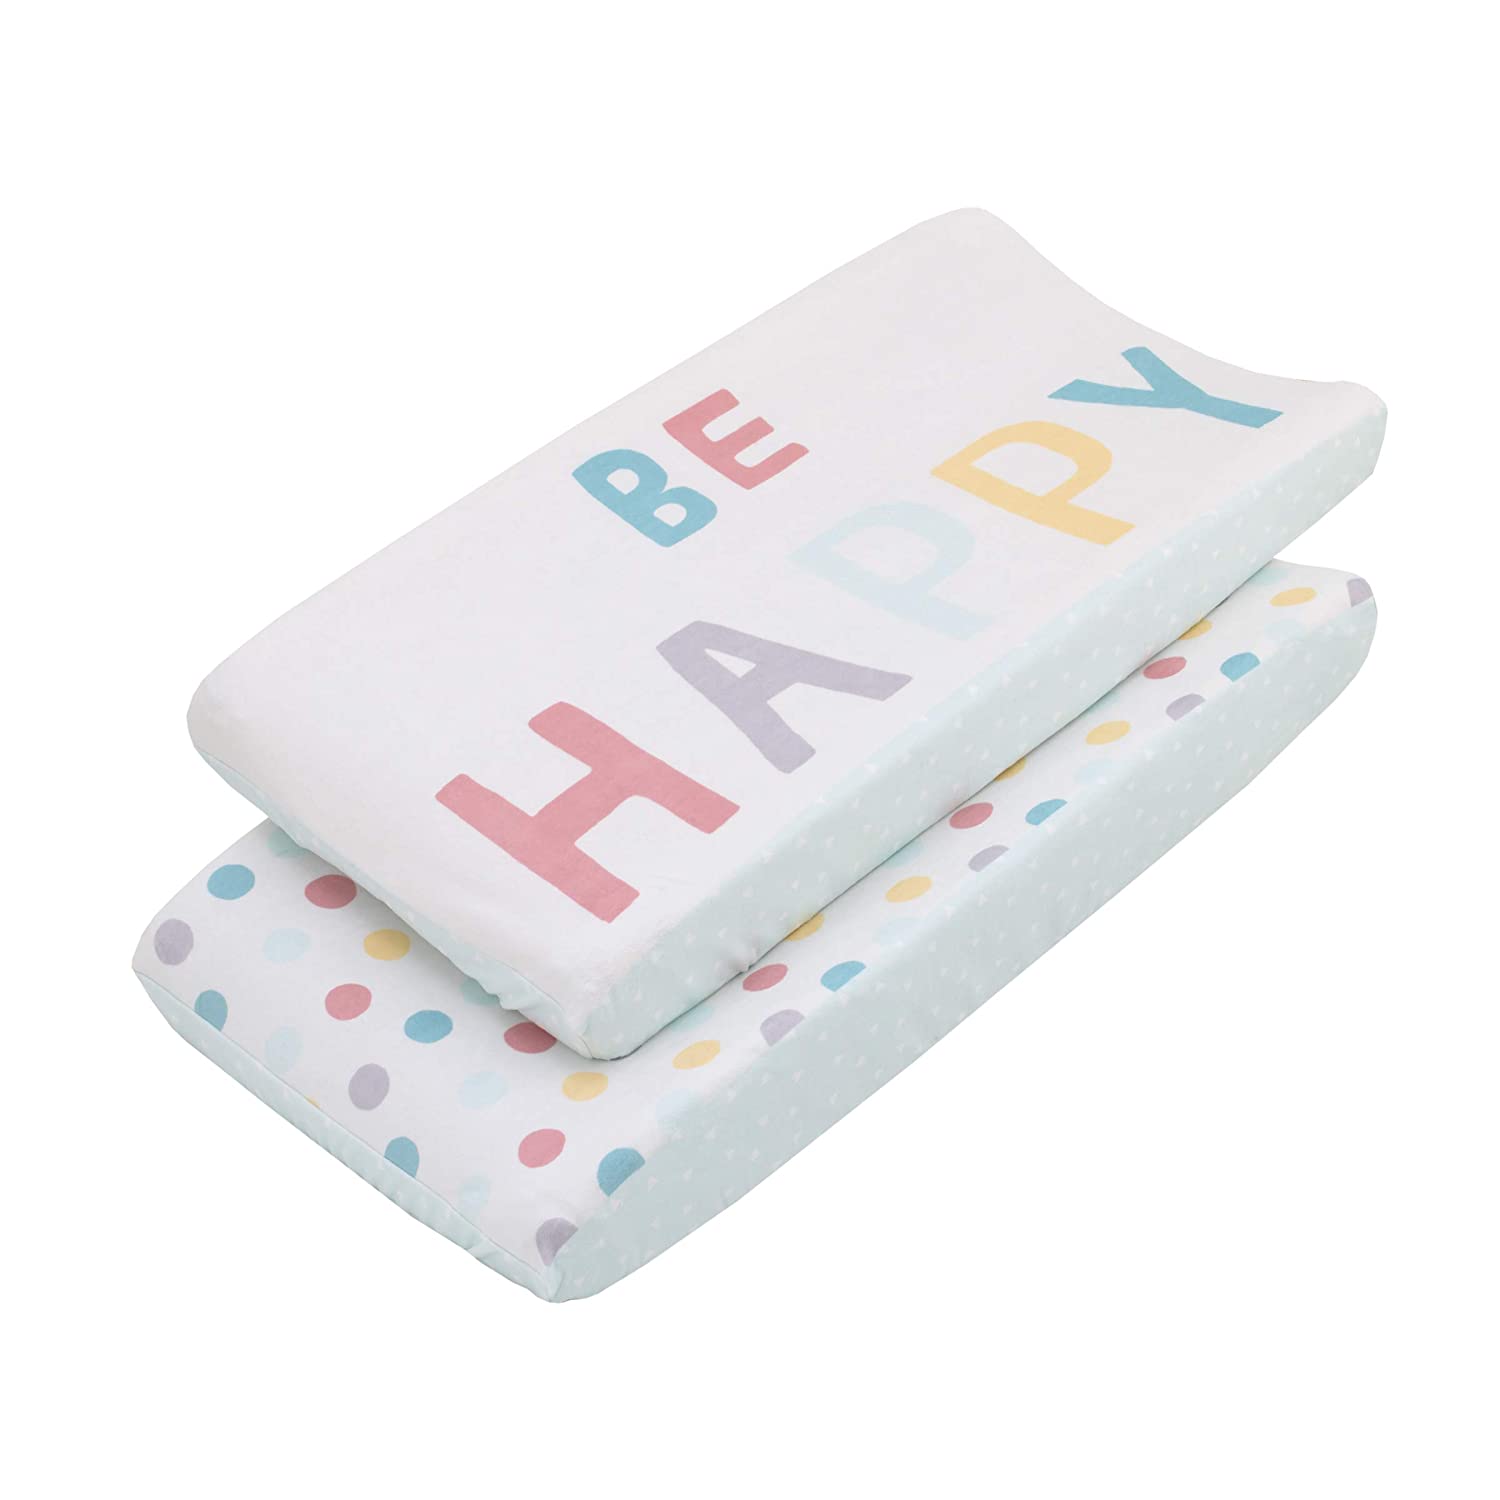 Super Soft Changing Pad Covers